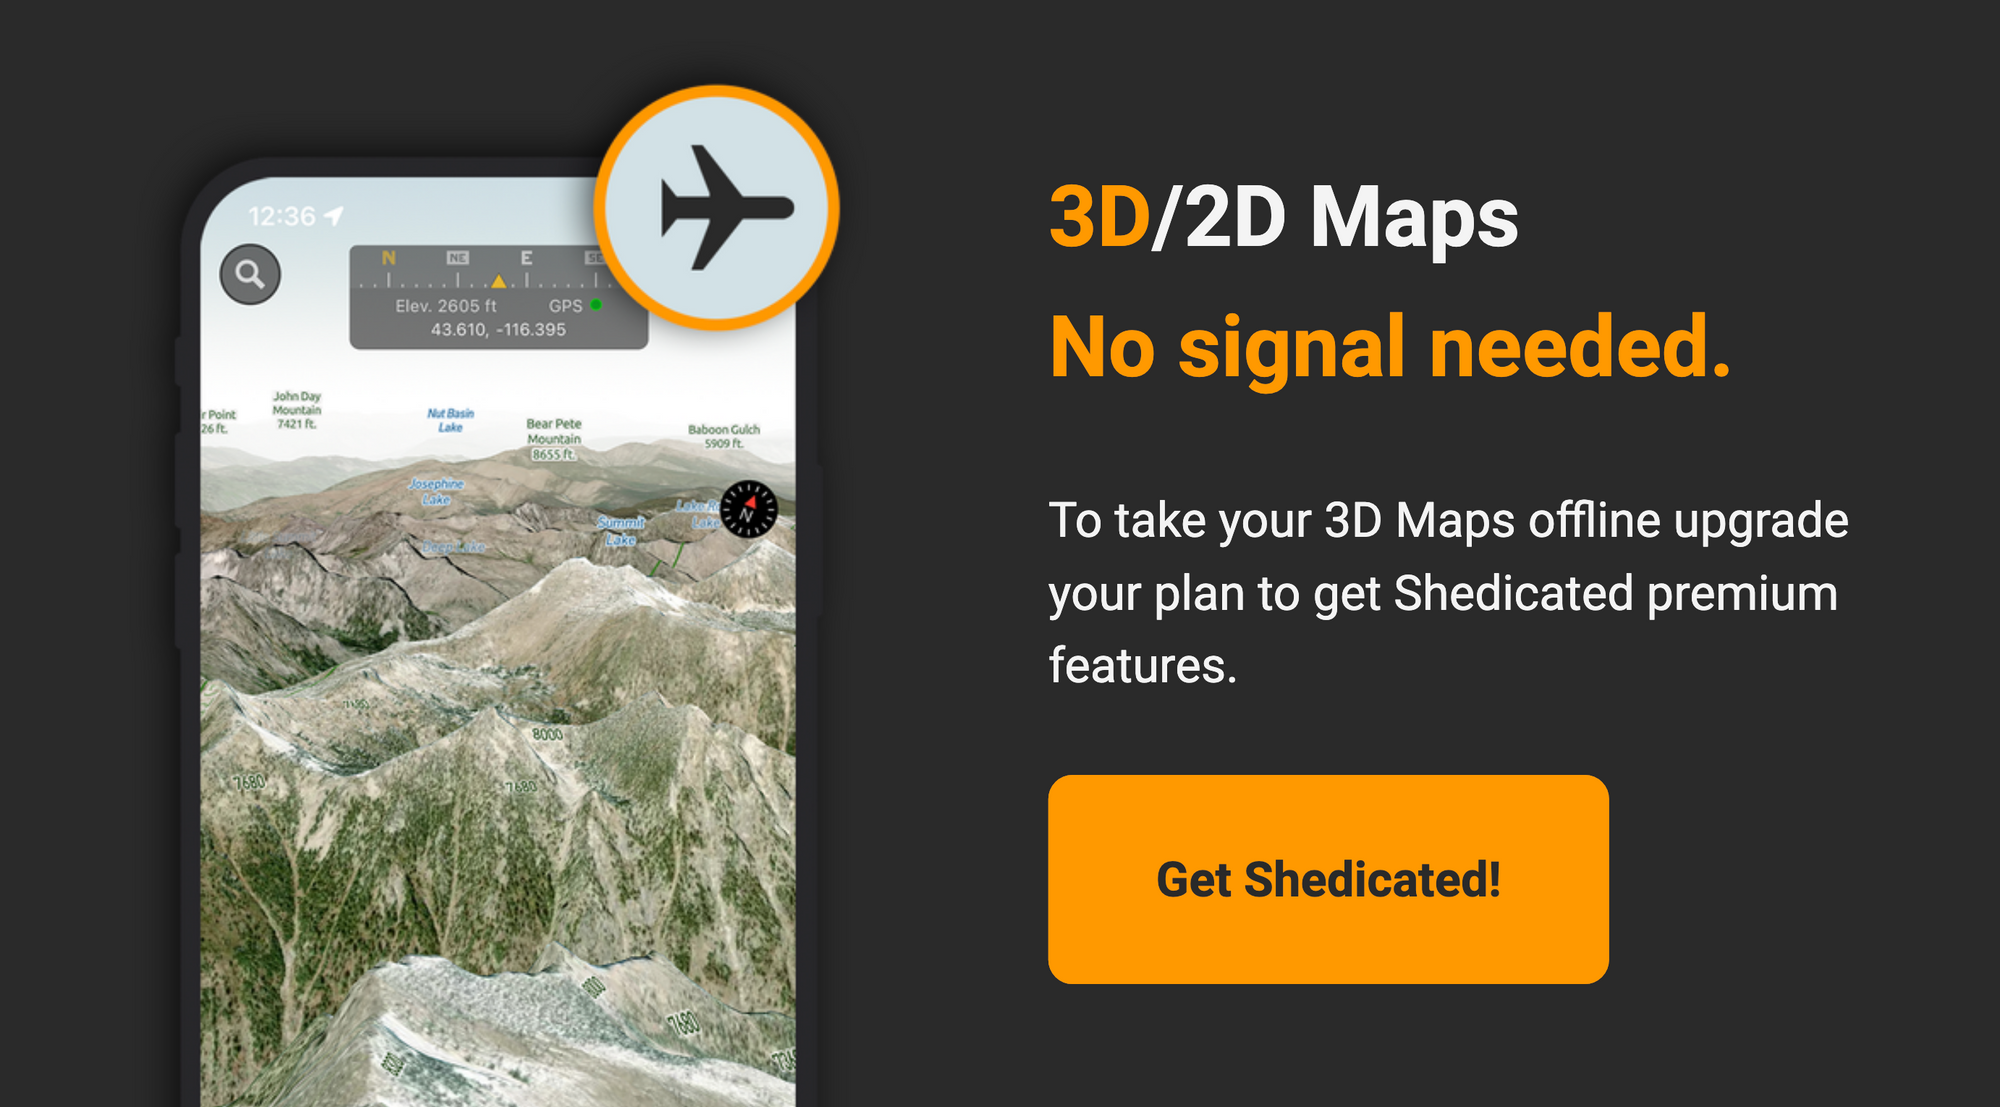 Offline 3D Maps - The First of its Kind